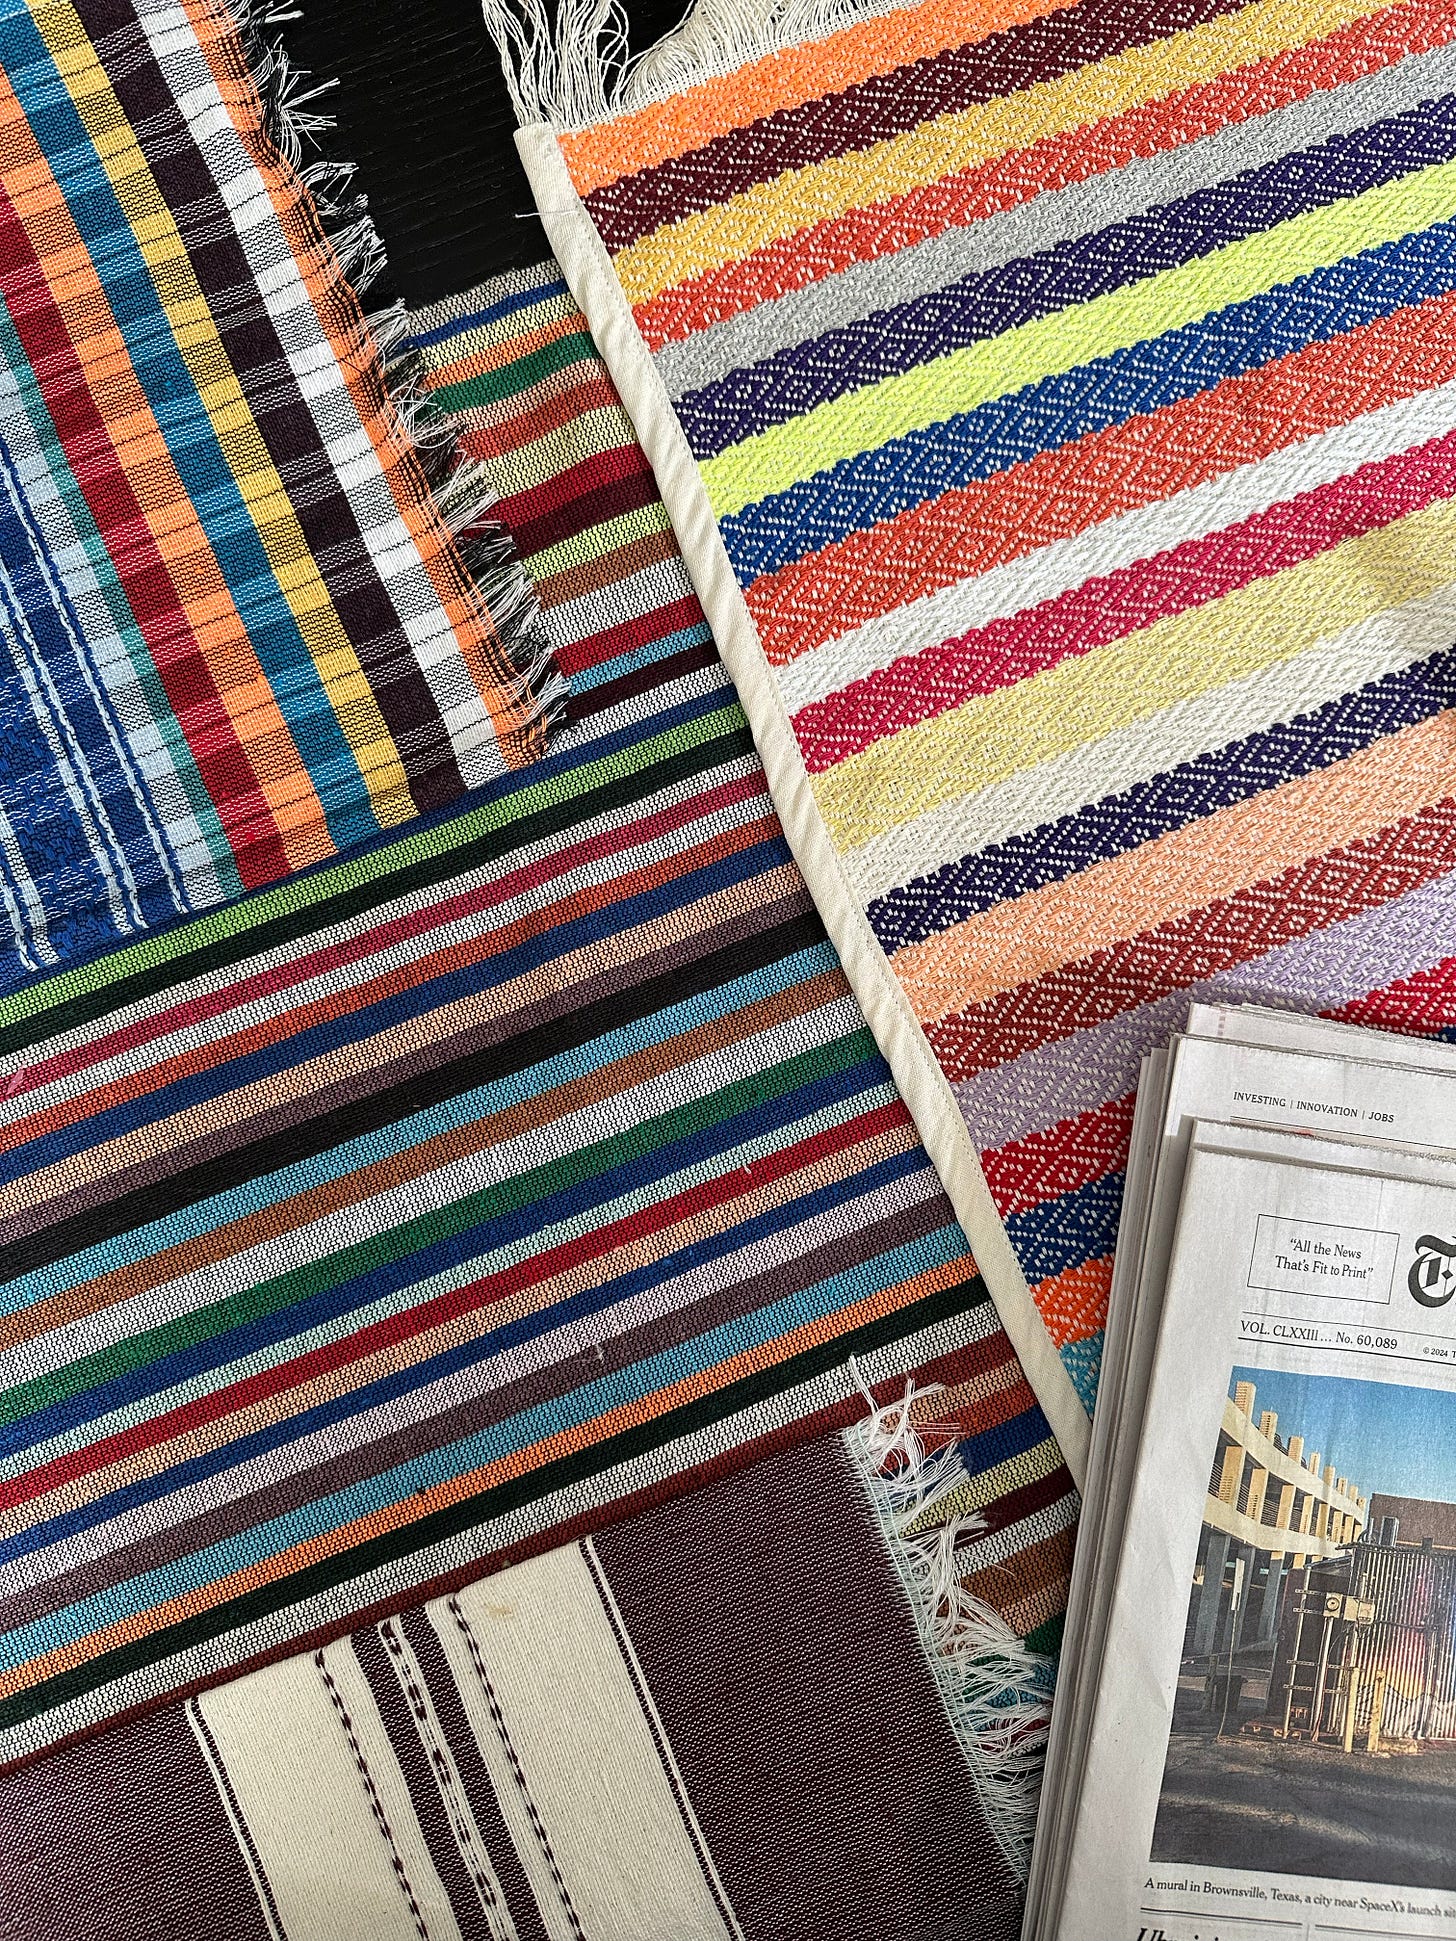 Tight shot of a table with four different colorful placemats and part of a newspaper